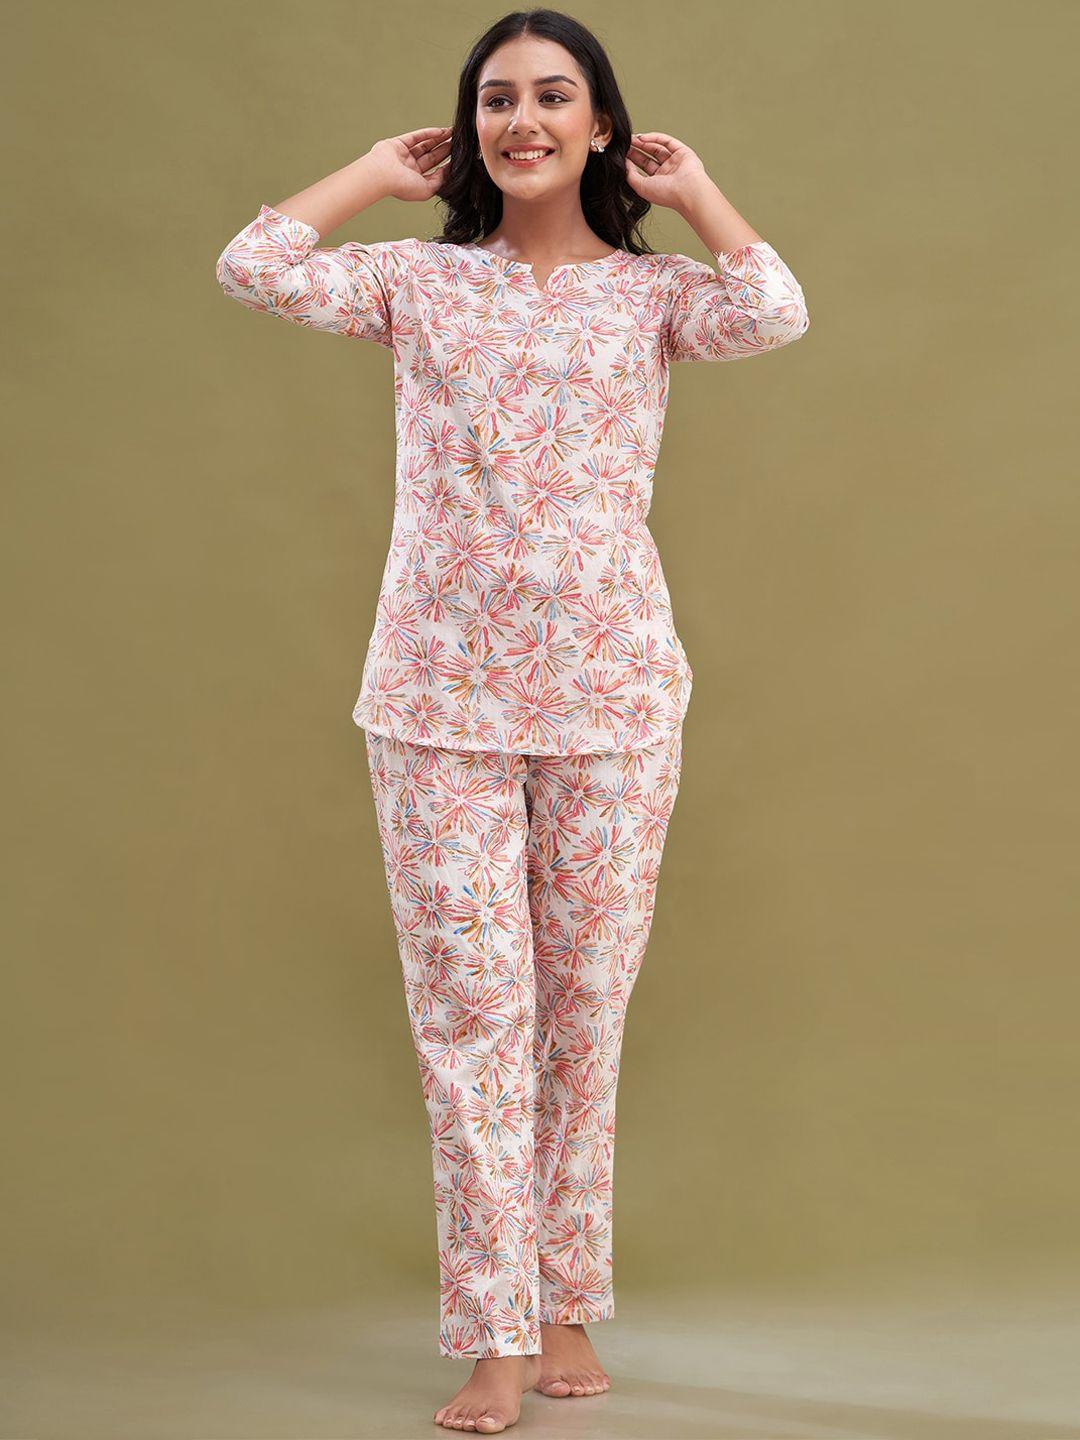 feranoid floral printed pure cotton night suit